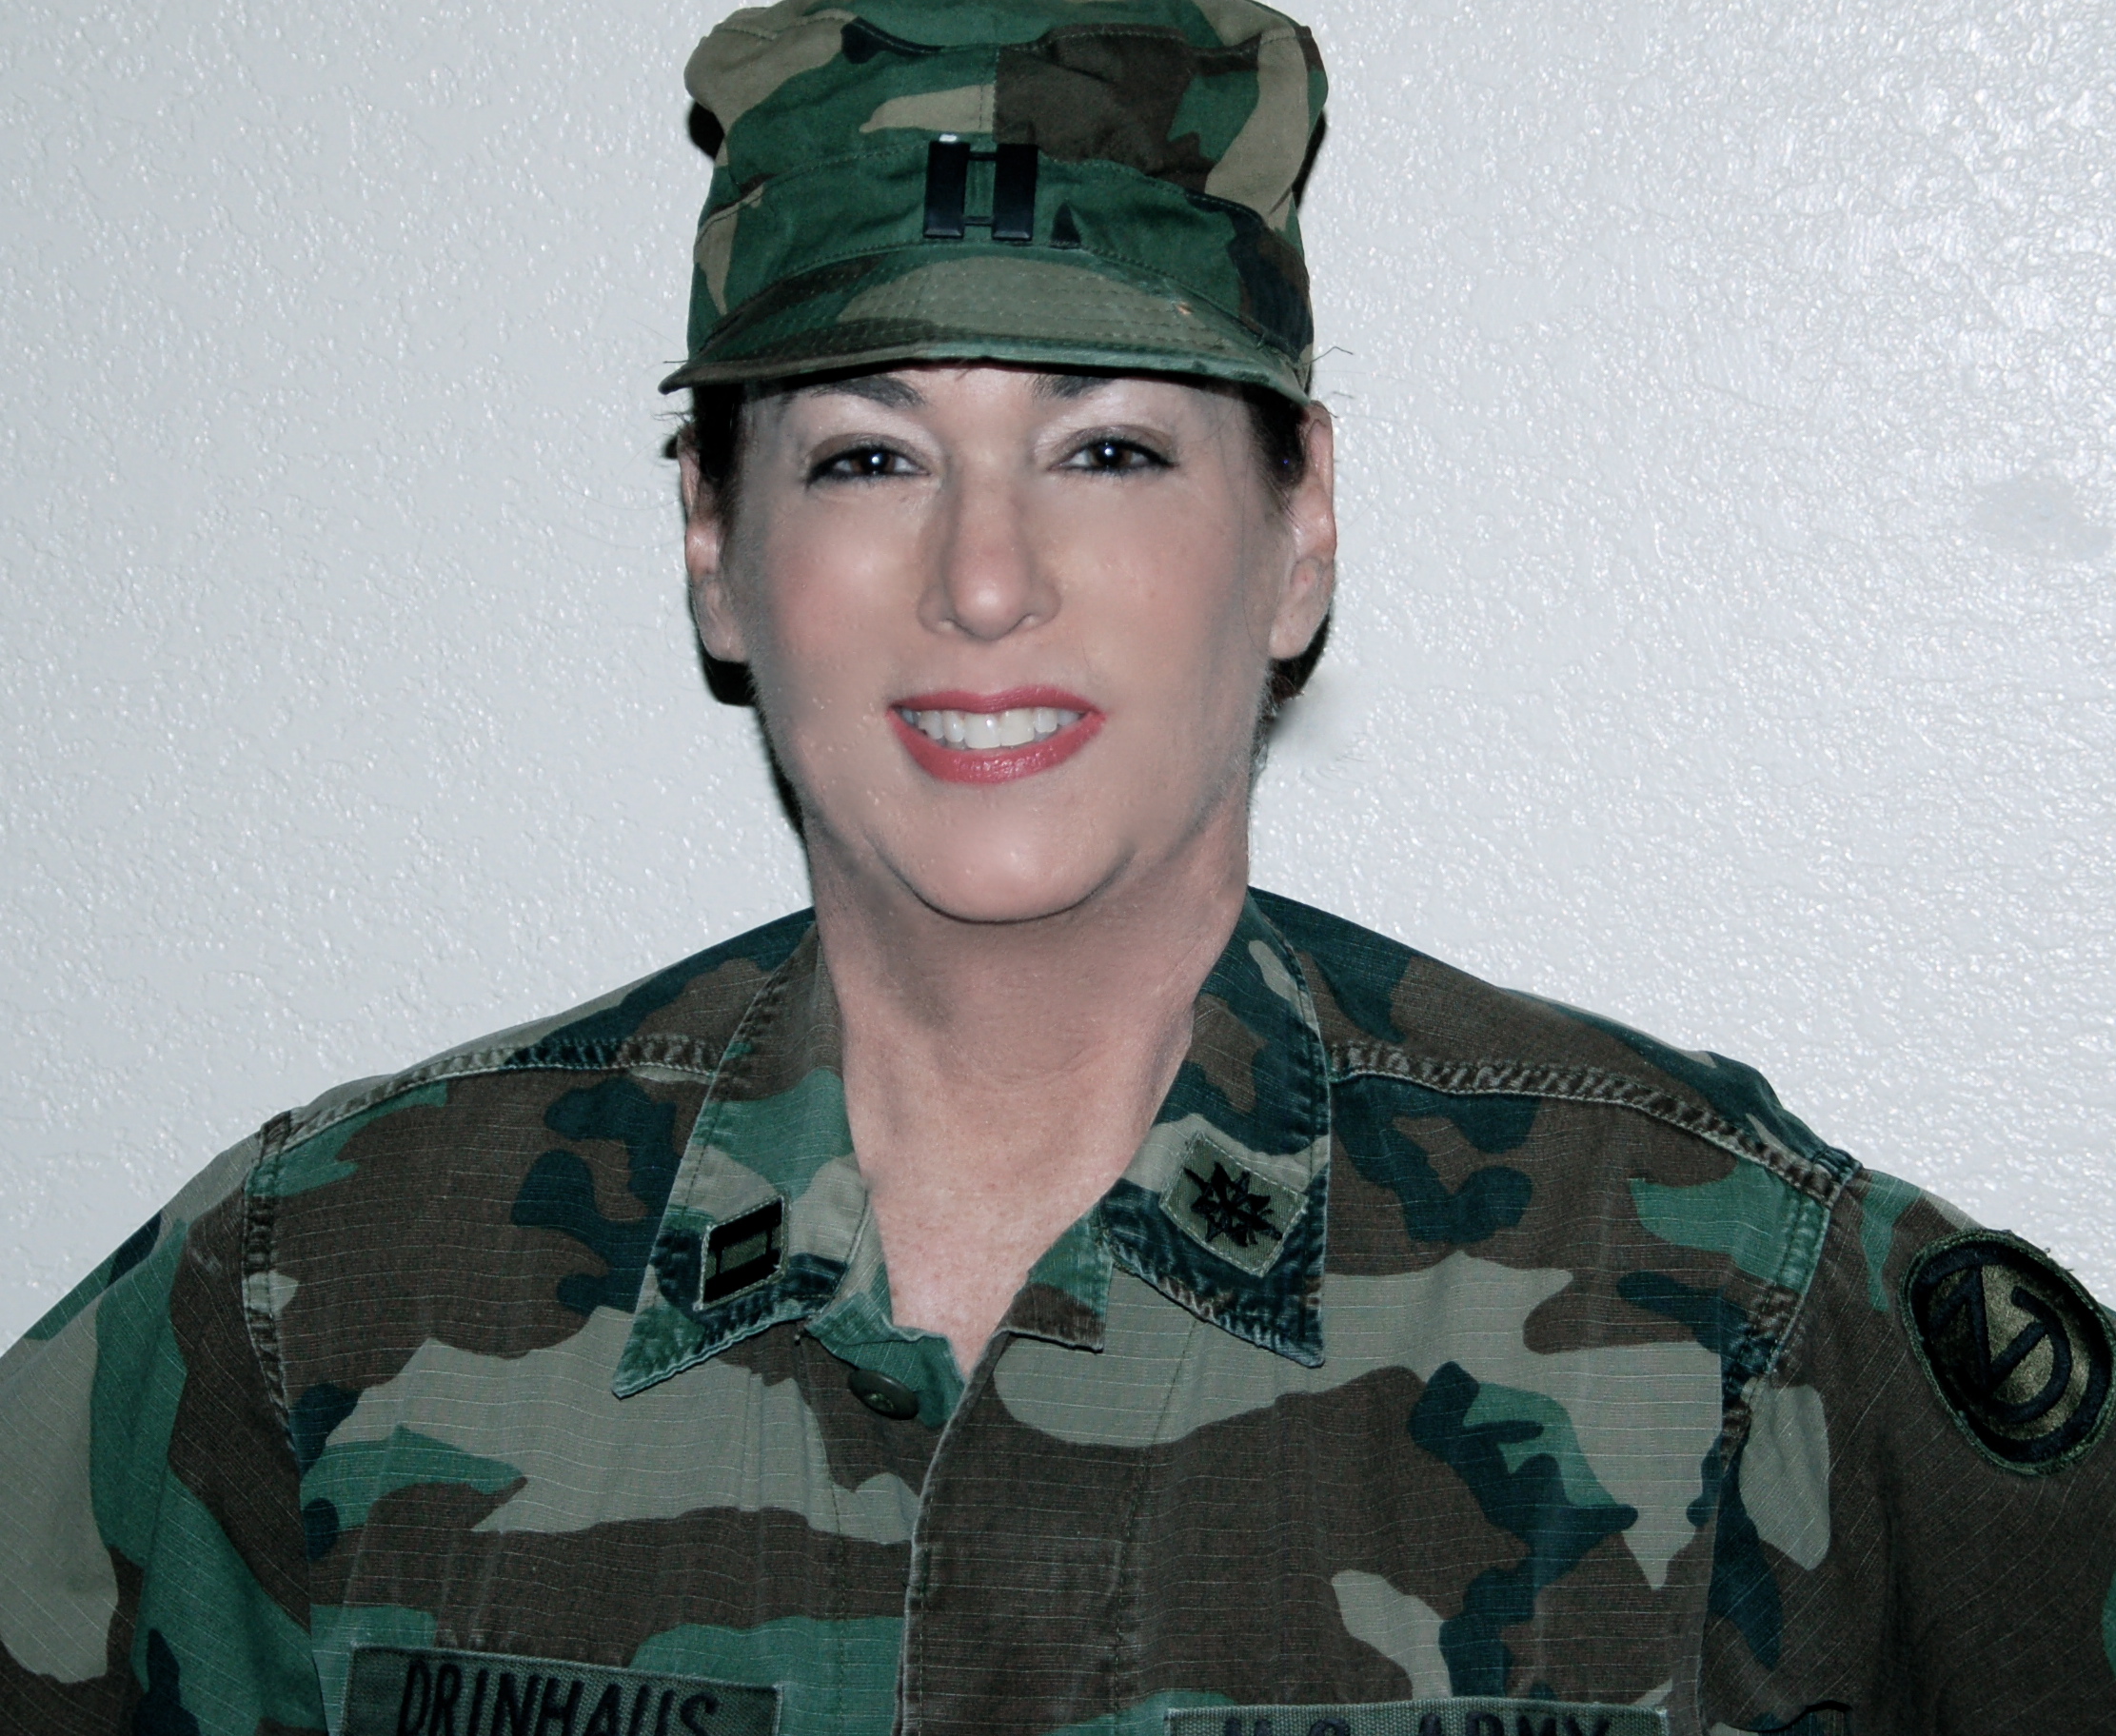 Captain Gayle Drinhaus - Retired Army Military Intell. Officer In Uniform 6/2013 for current look if needed.